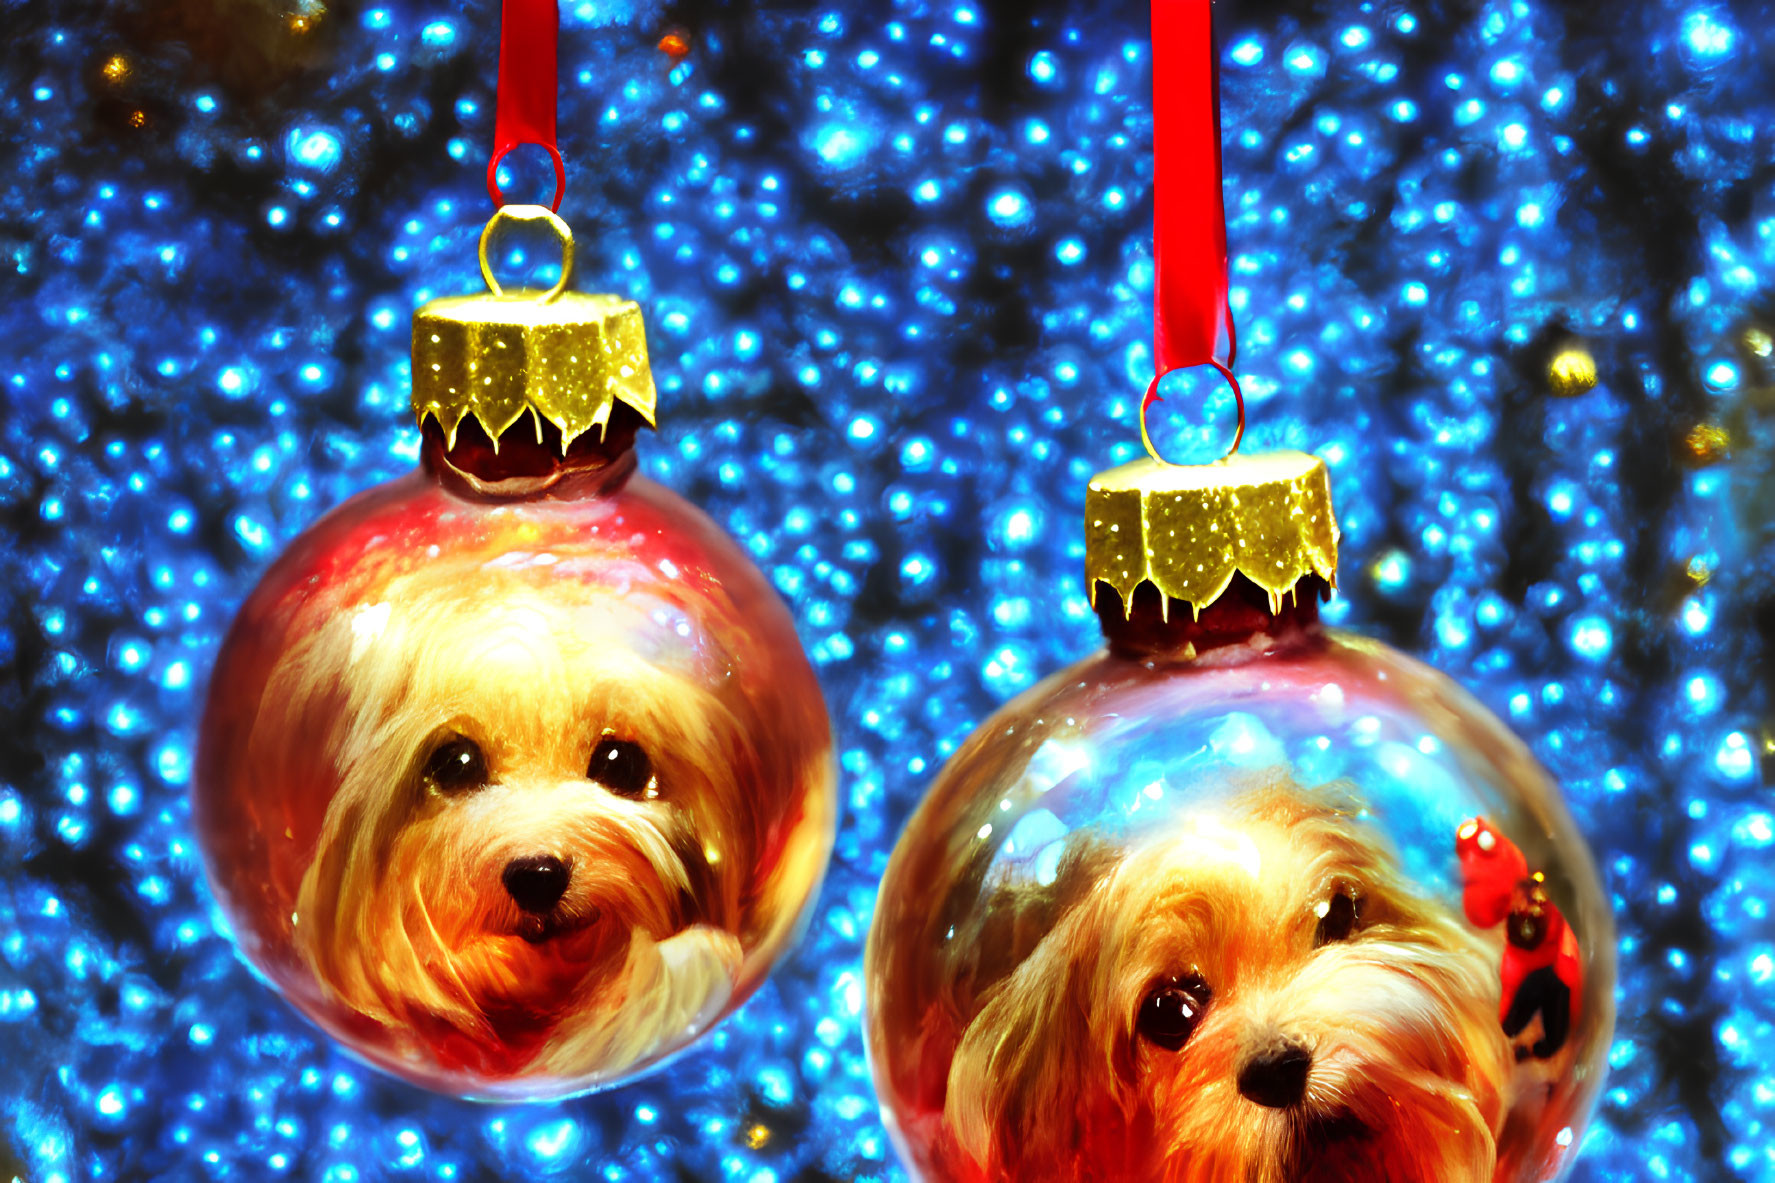 Christmas ornaments featuring dog images on glittery blue background